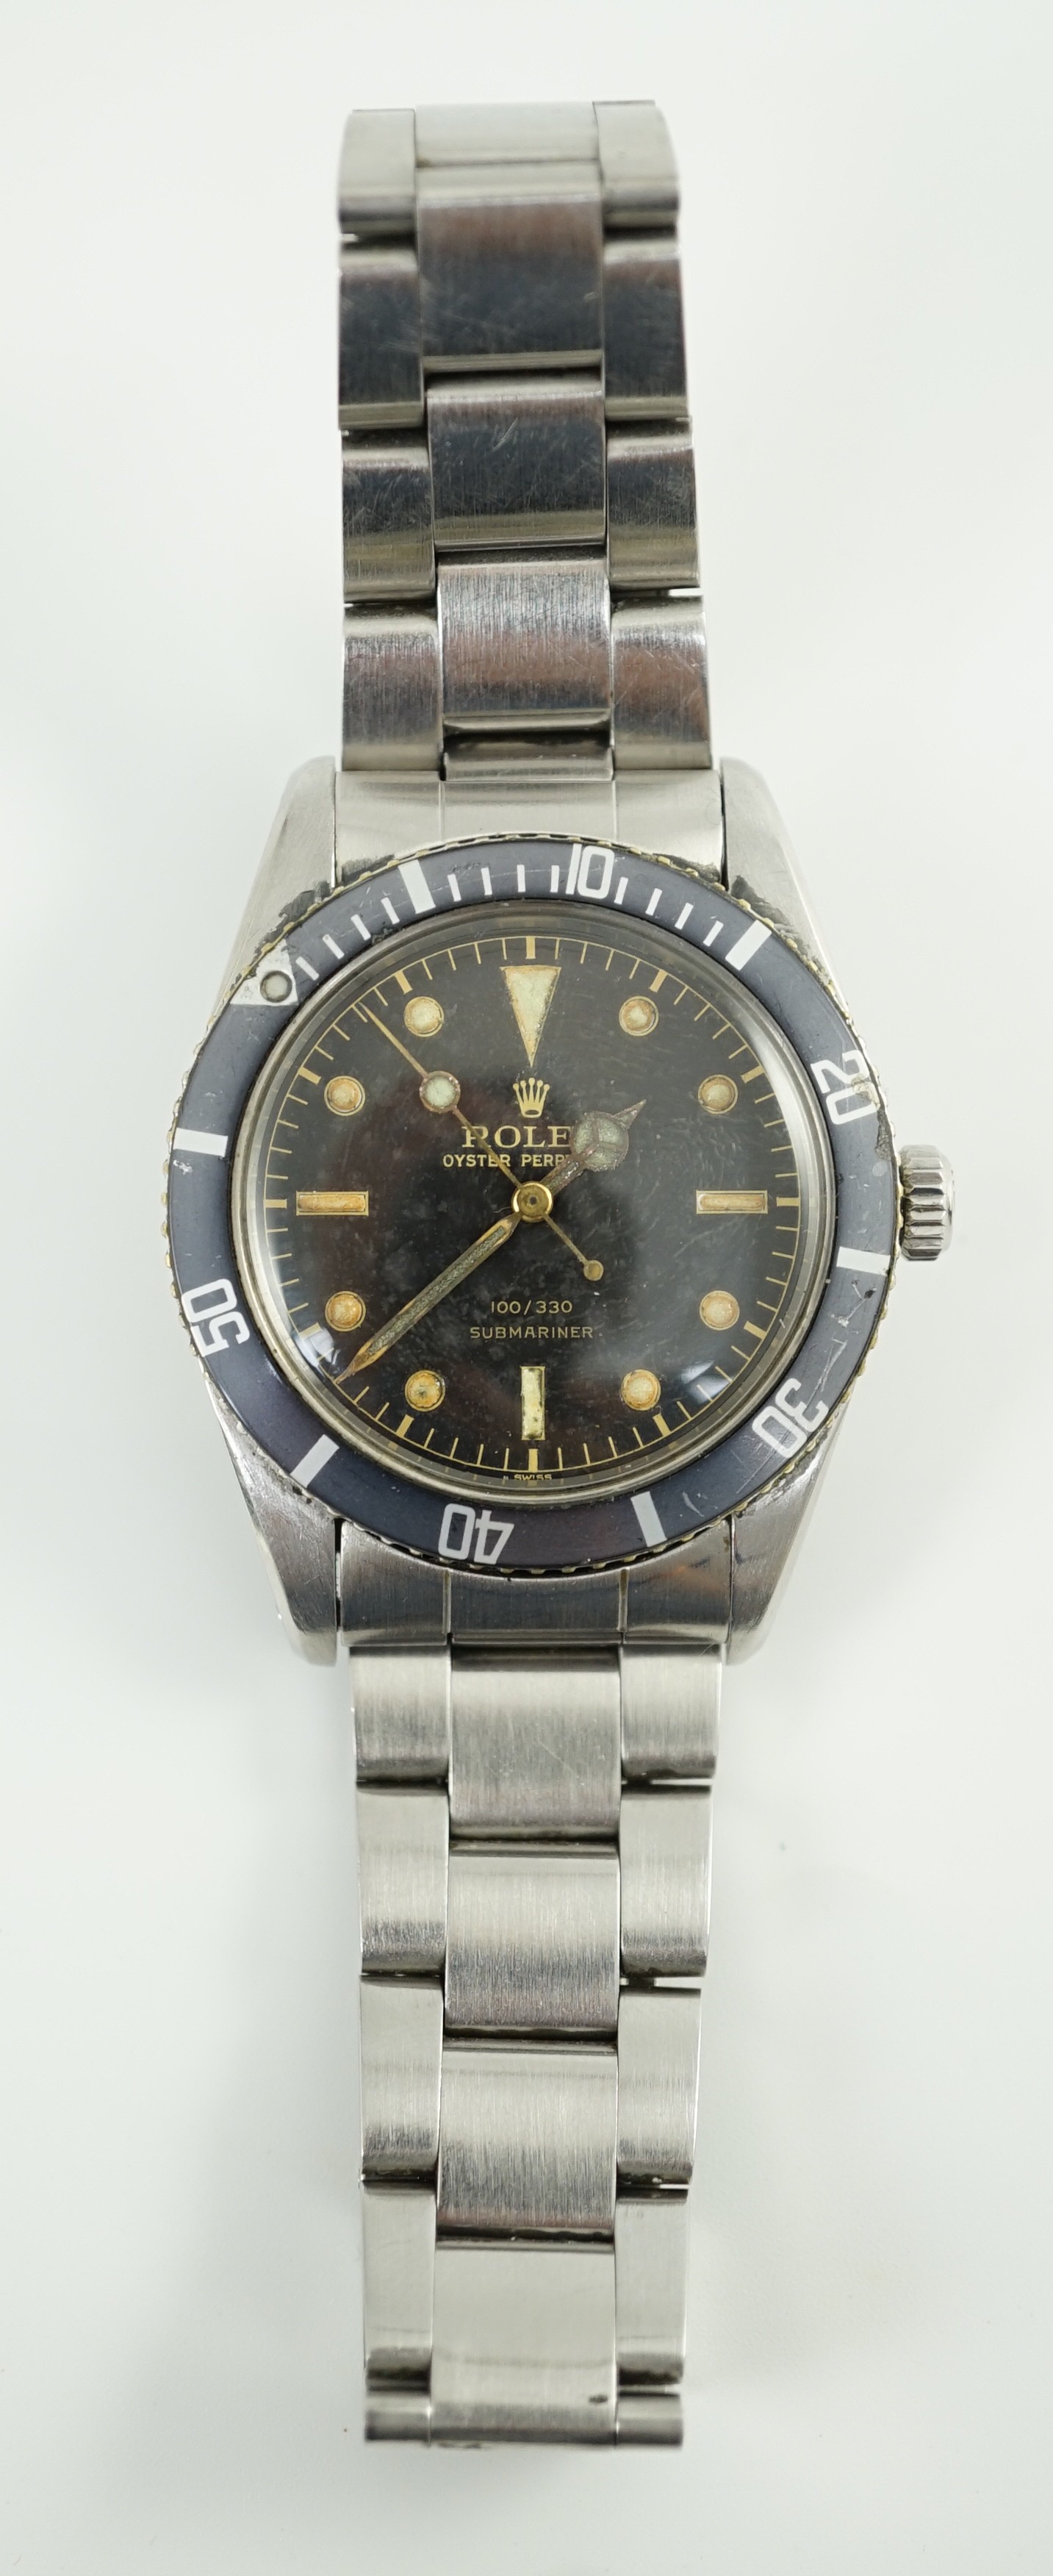 A gentleman's rare 1956 stainless steel Rolex Oyster Perpetual 100/330 Submariner wrist watch